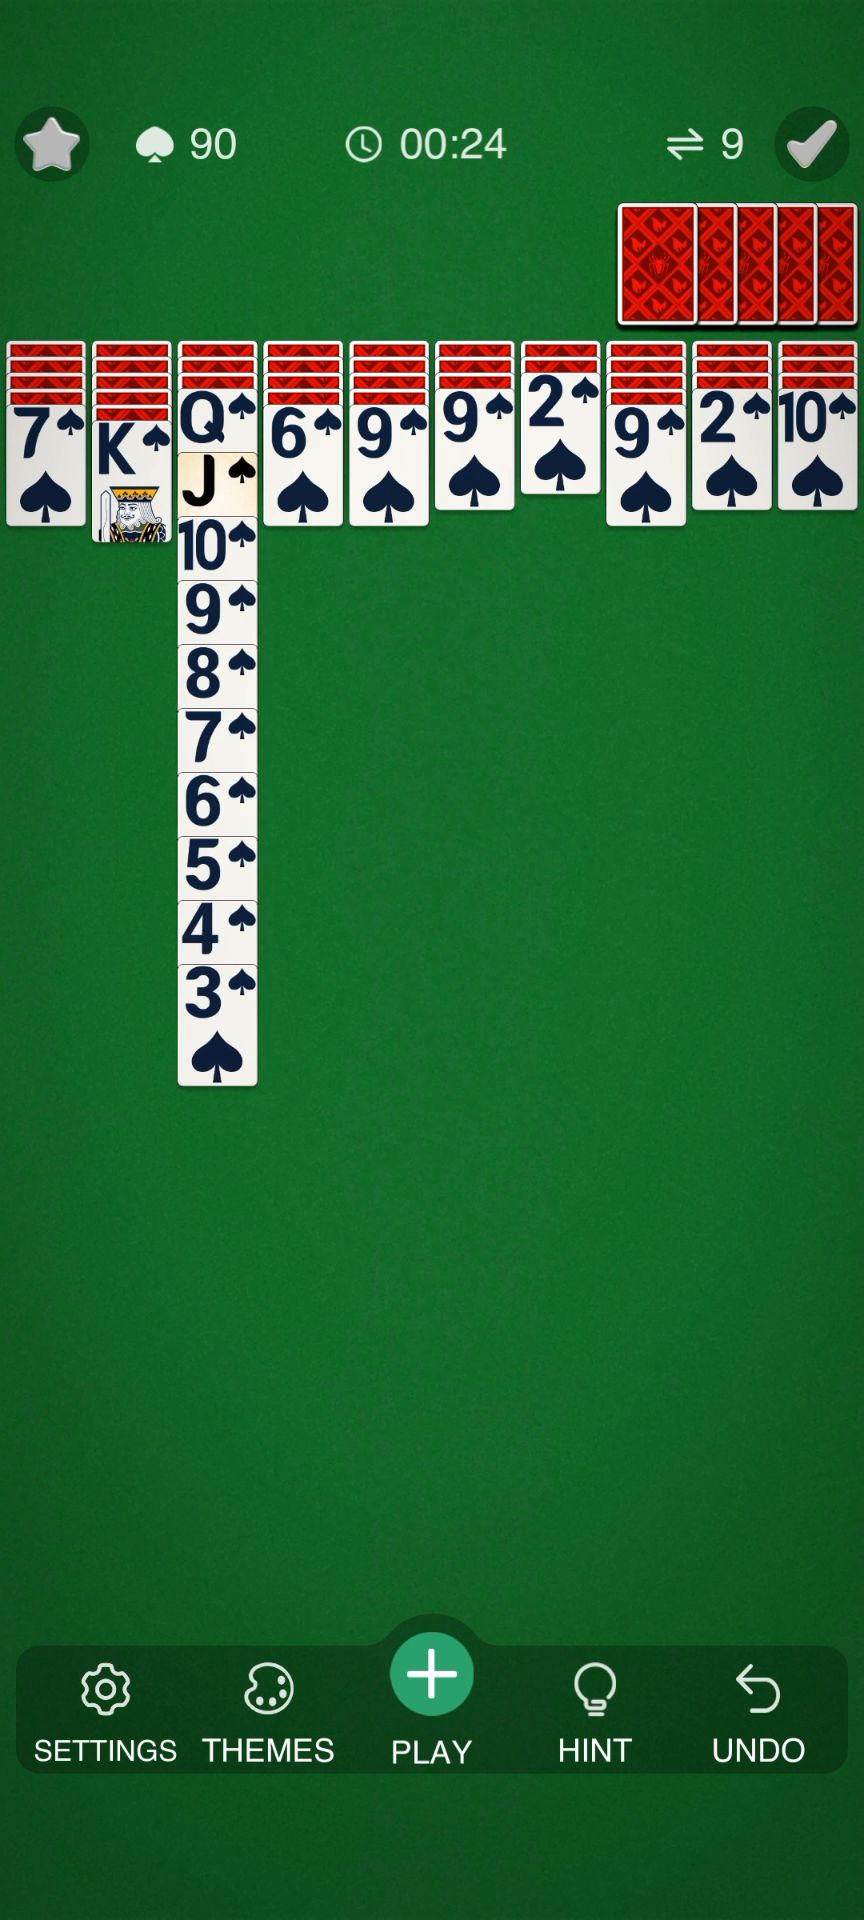 Gameplay of the Spider Solitaire Classic for Android phone or tablet.